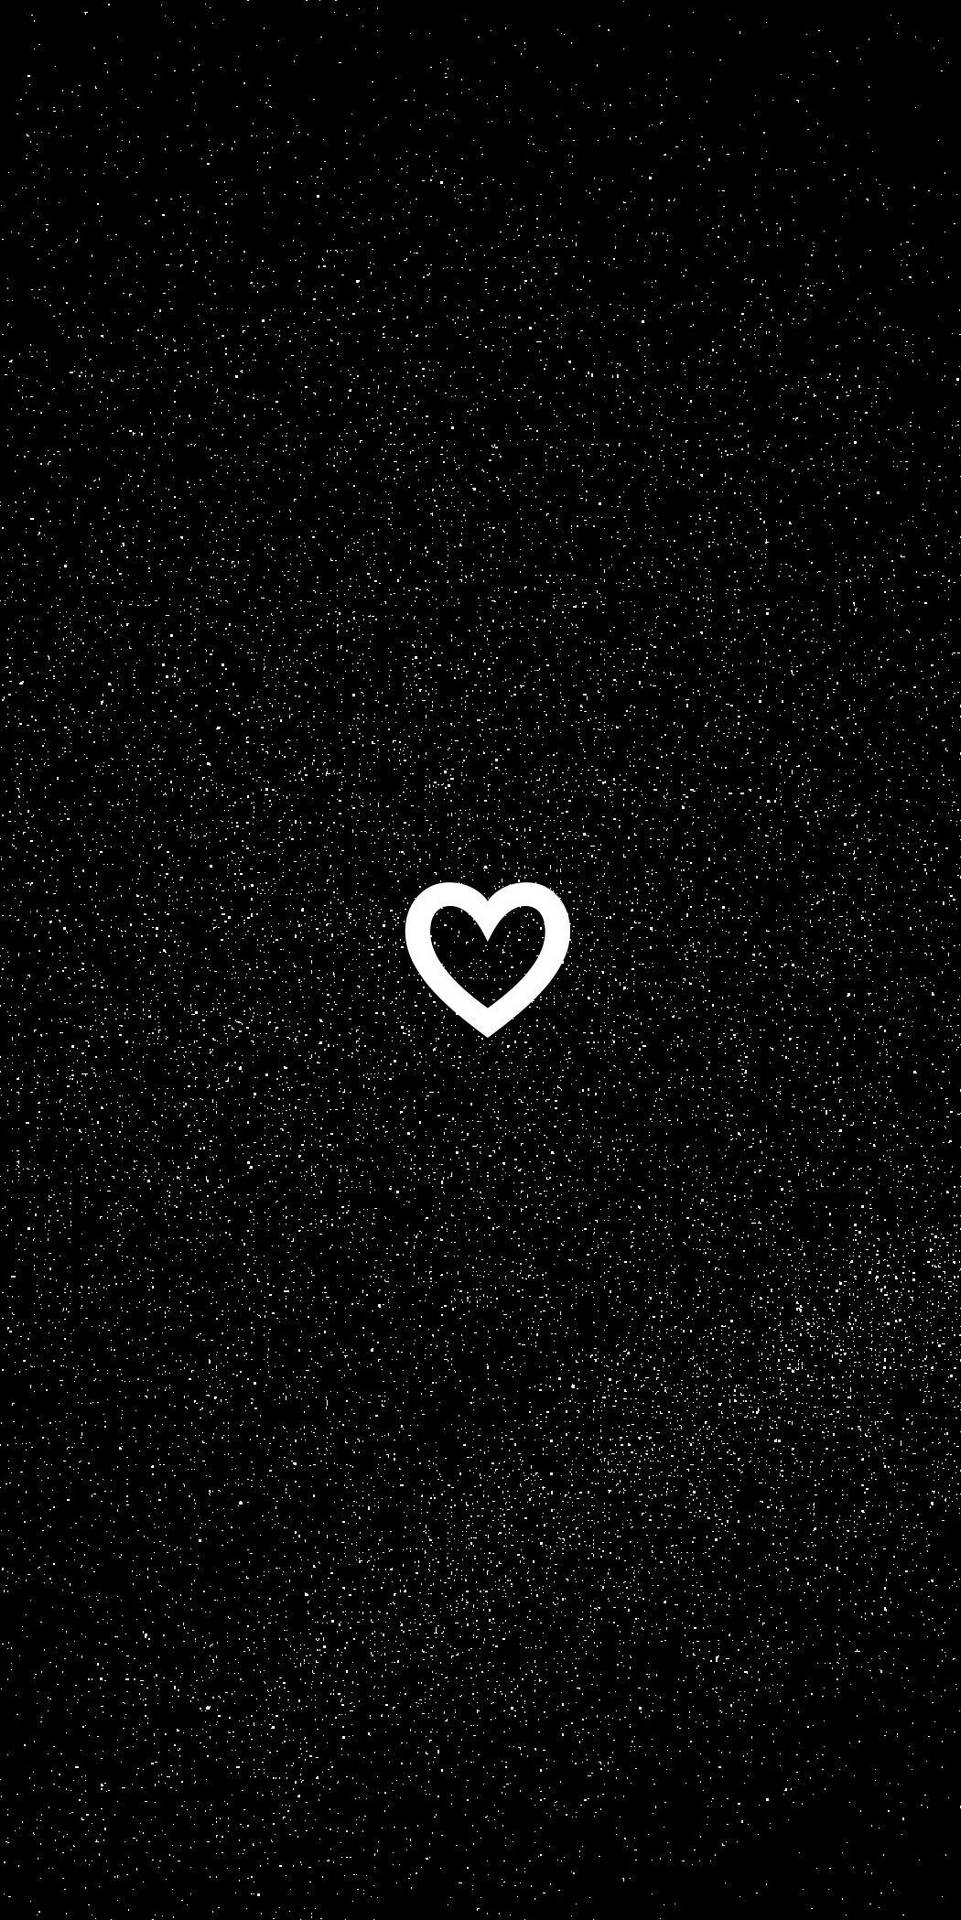 Dark Girly Heart With Sparkles Wallpaper